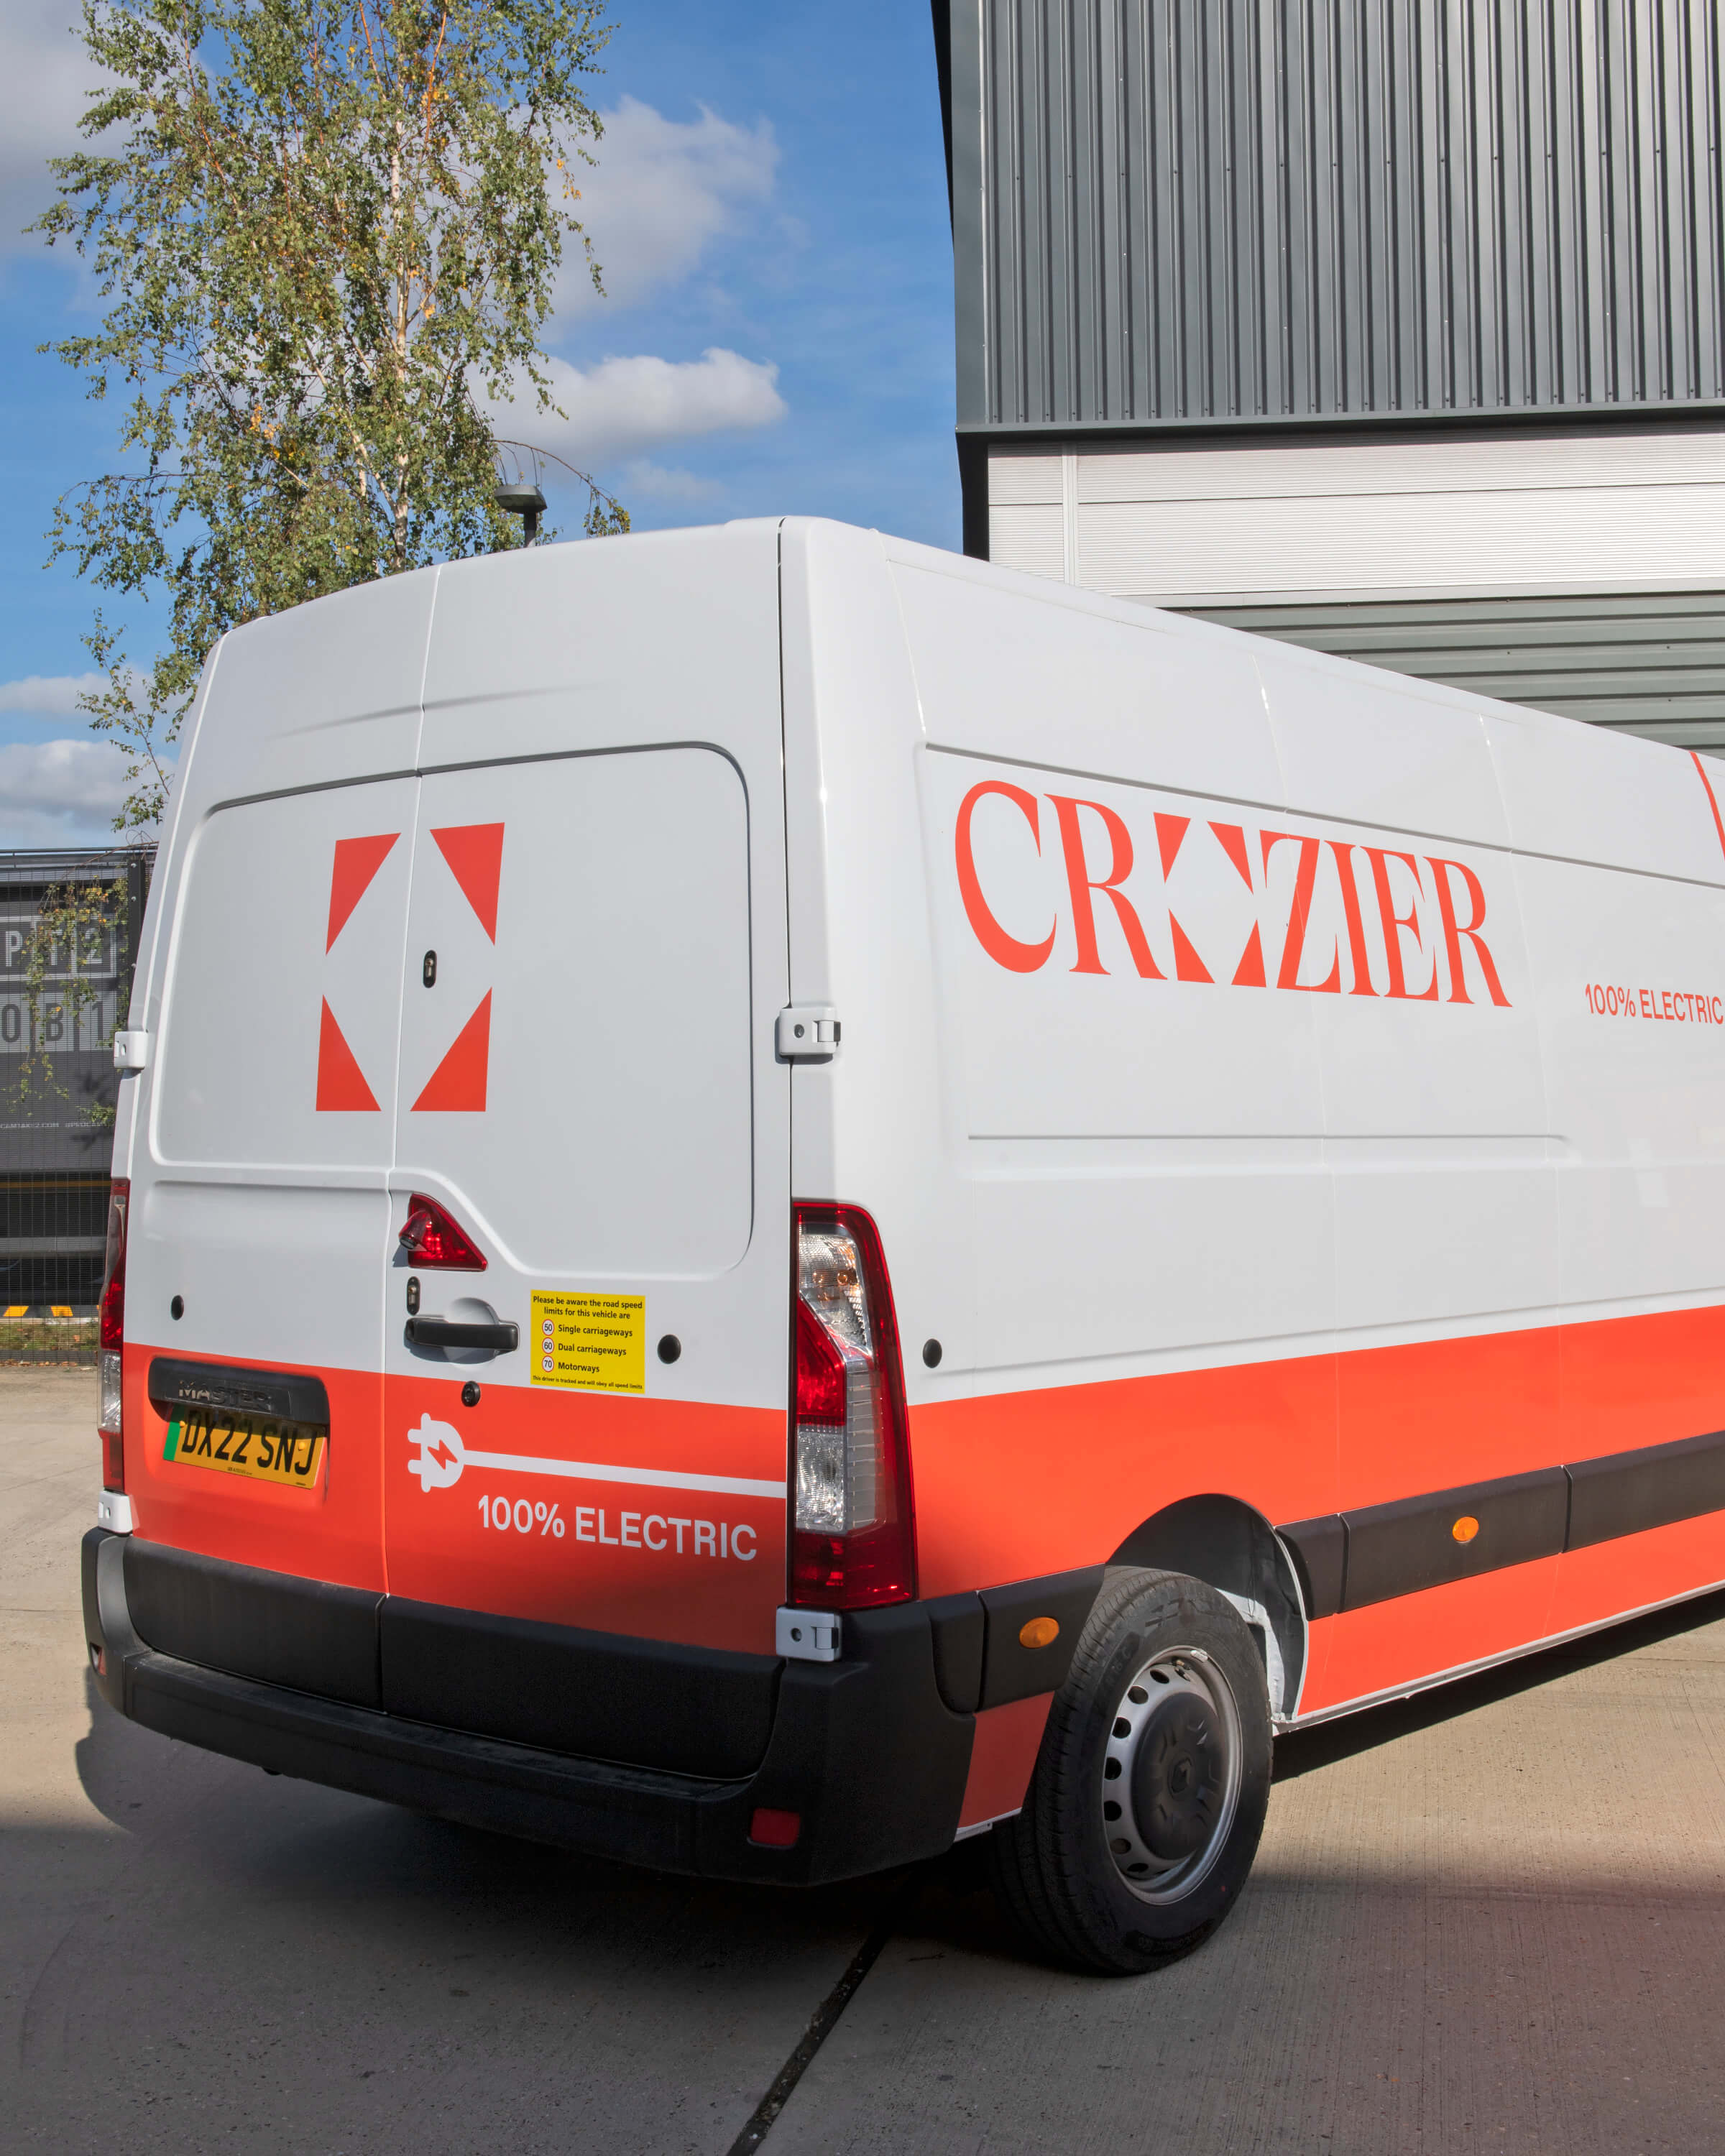 100 percent of Crozier's transport vehicles in the UK are electric 